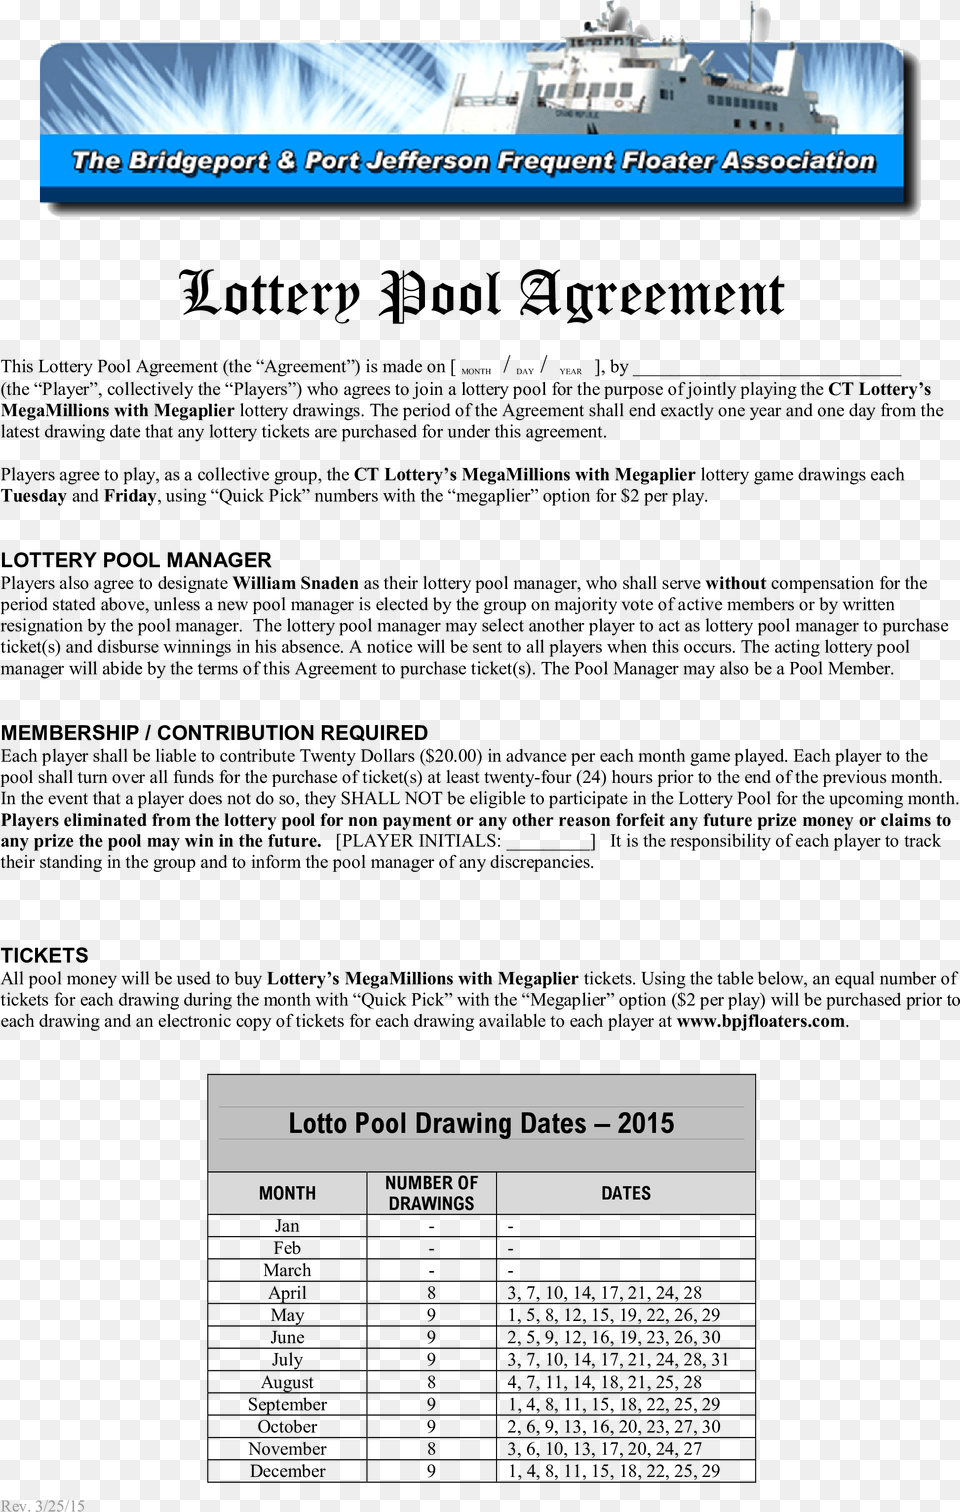 Lottery Ticket Pool Agreement Main Image Lottery Pool Agreement Template, Text, File Free Png